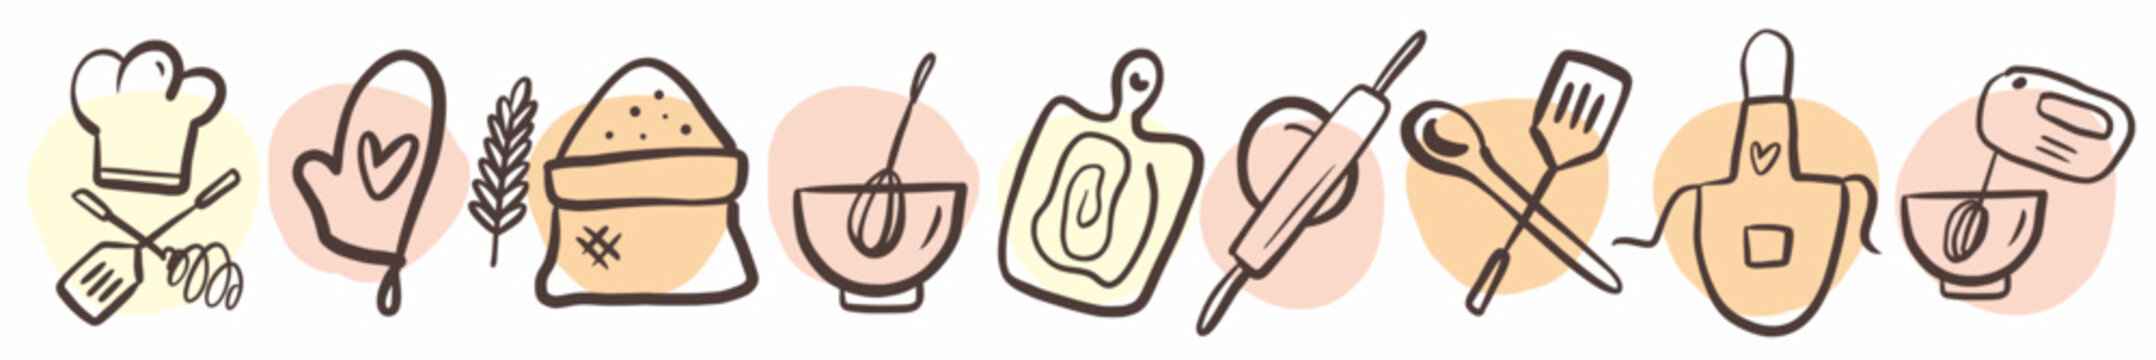 A collection of icons for bakeries and cooking with kitchen utensils hand-drawn in the style of a doodle.